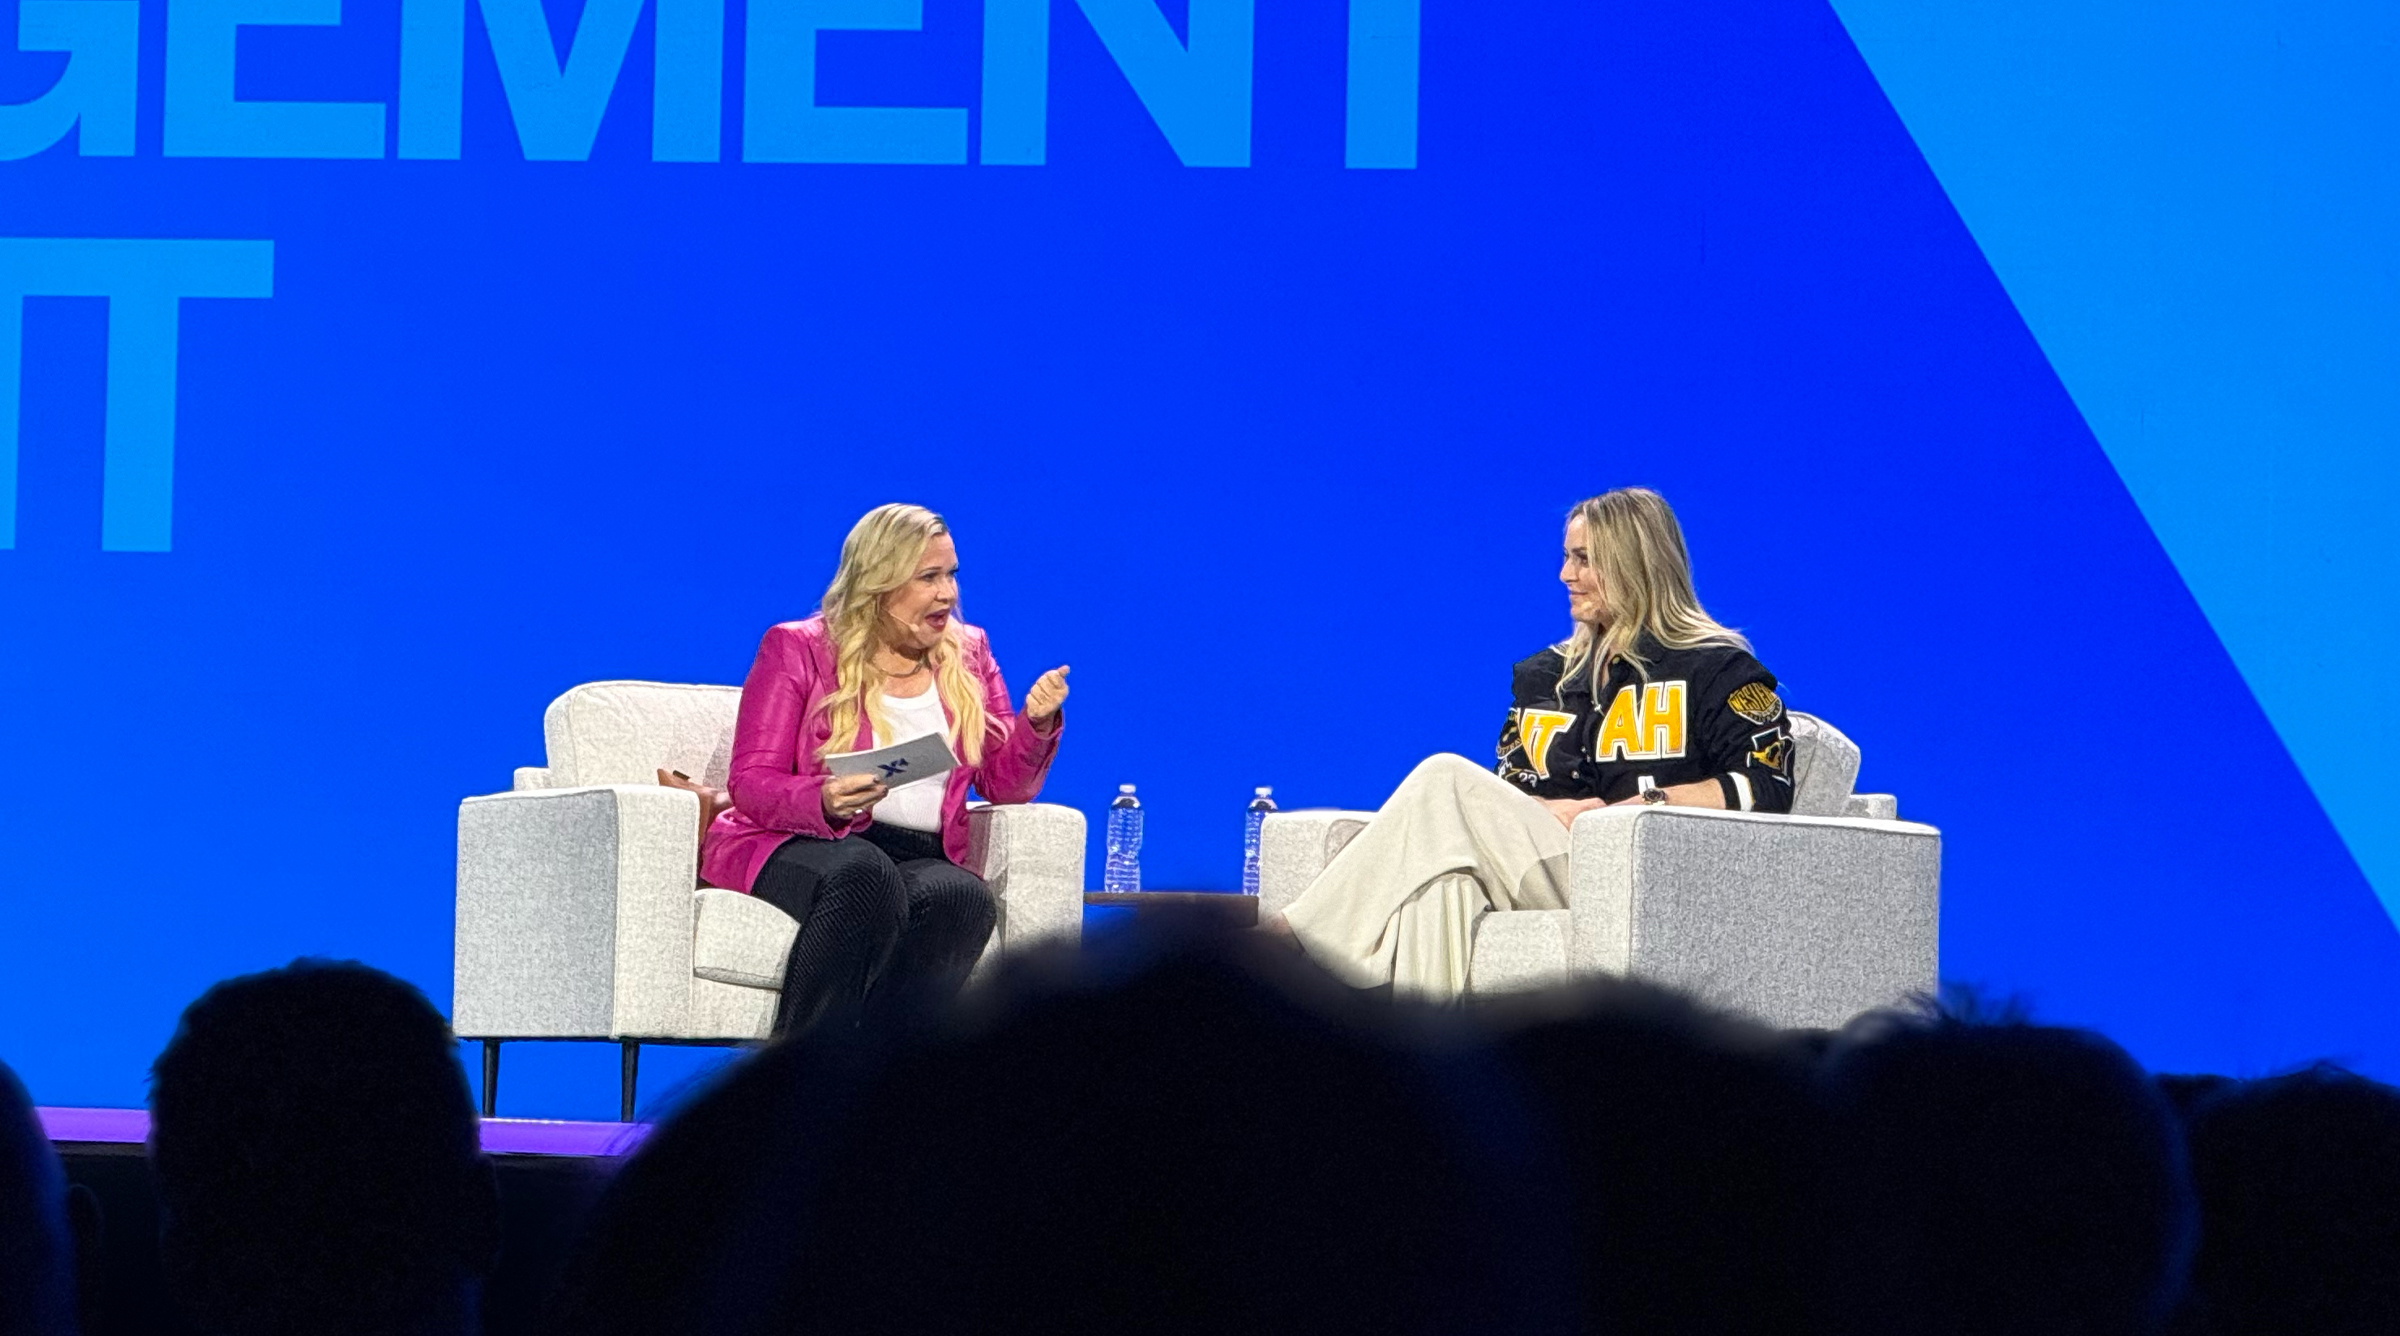 Lindsey Vonn, right, speaking to the panel host.